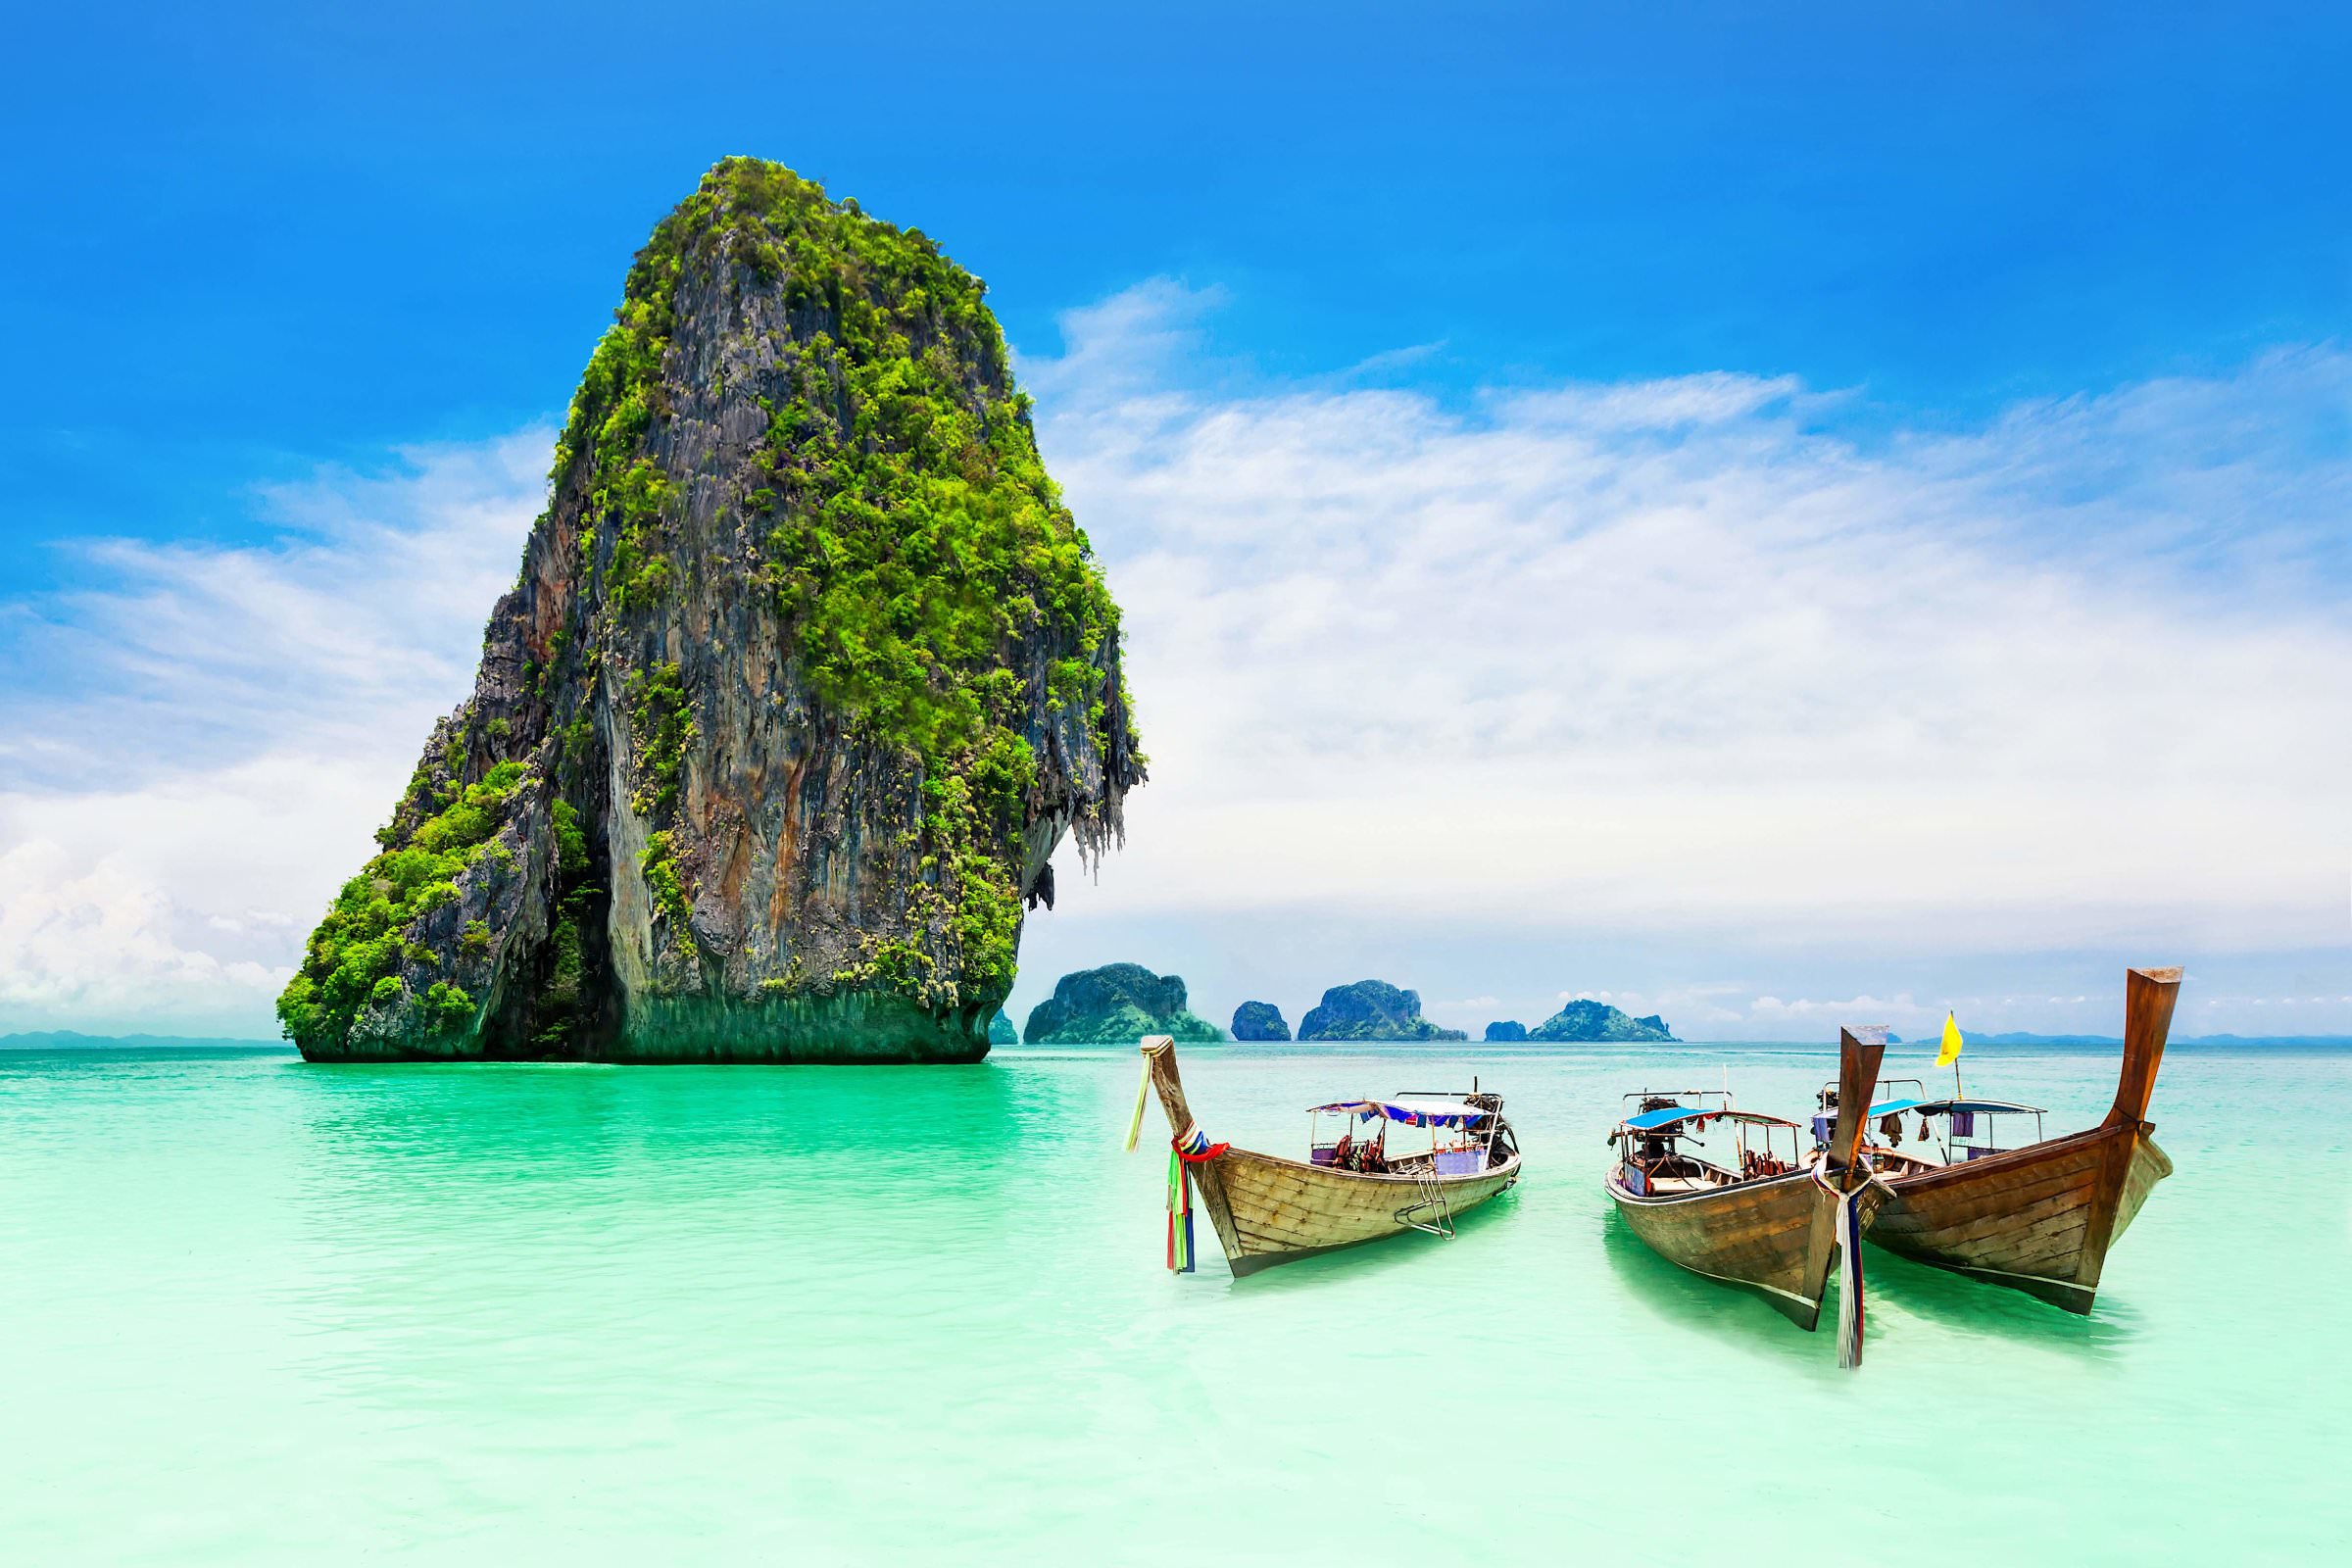 The 9 day Thailand honeymoon itinerary for never-ending romance